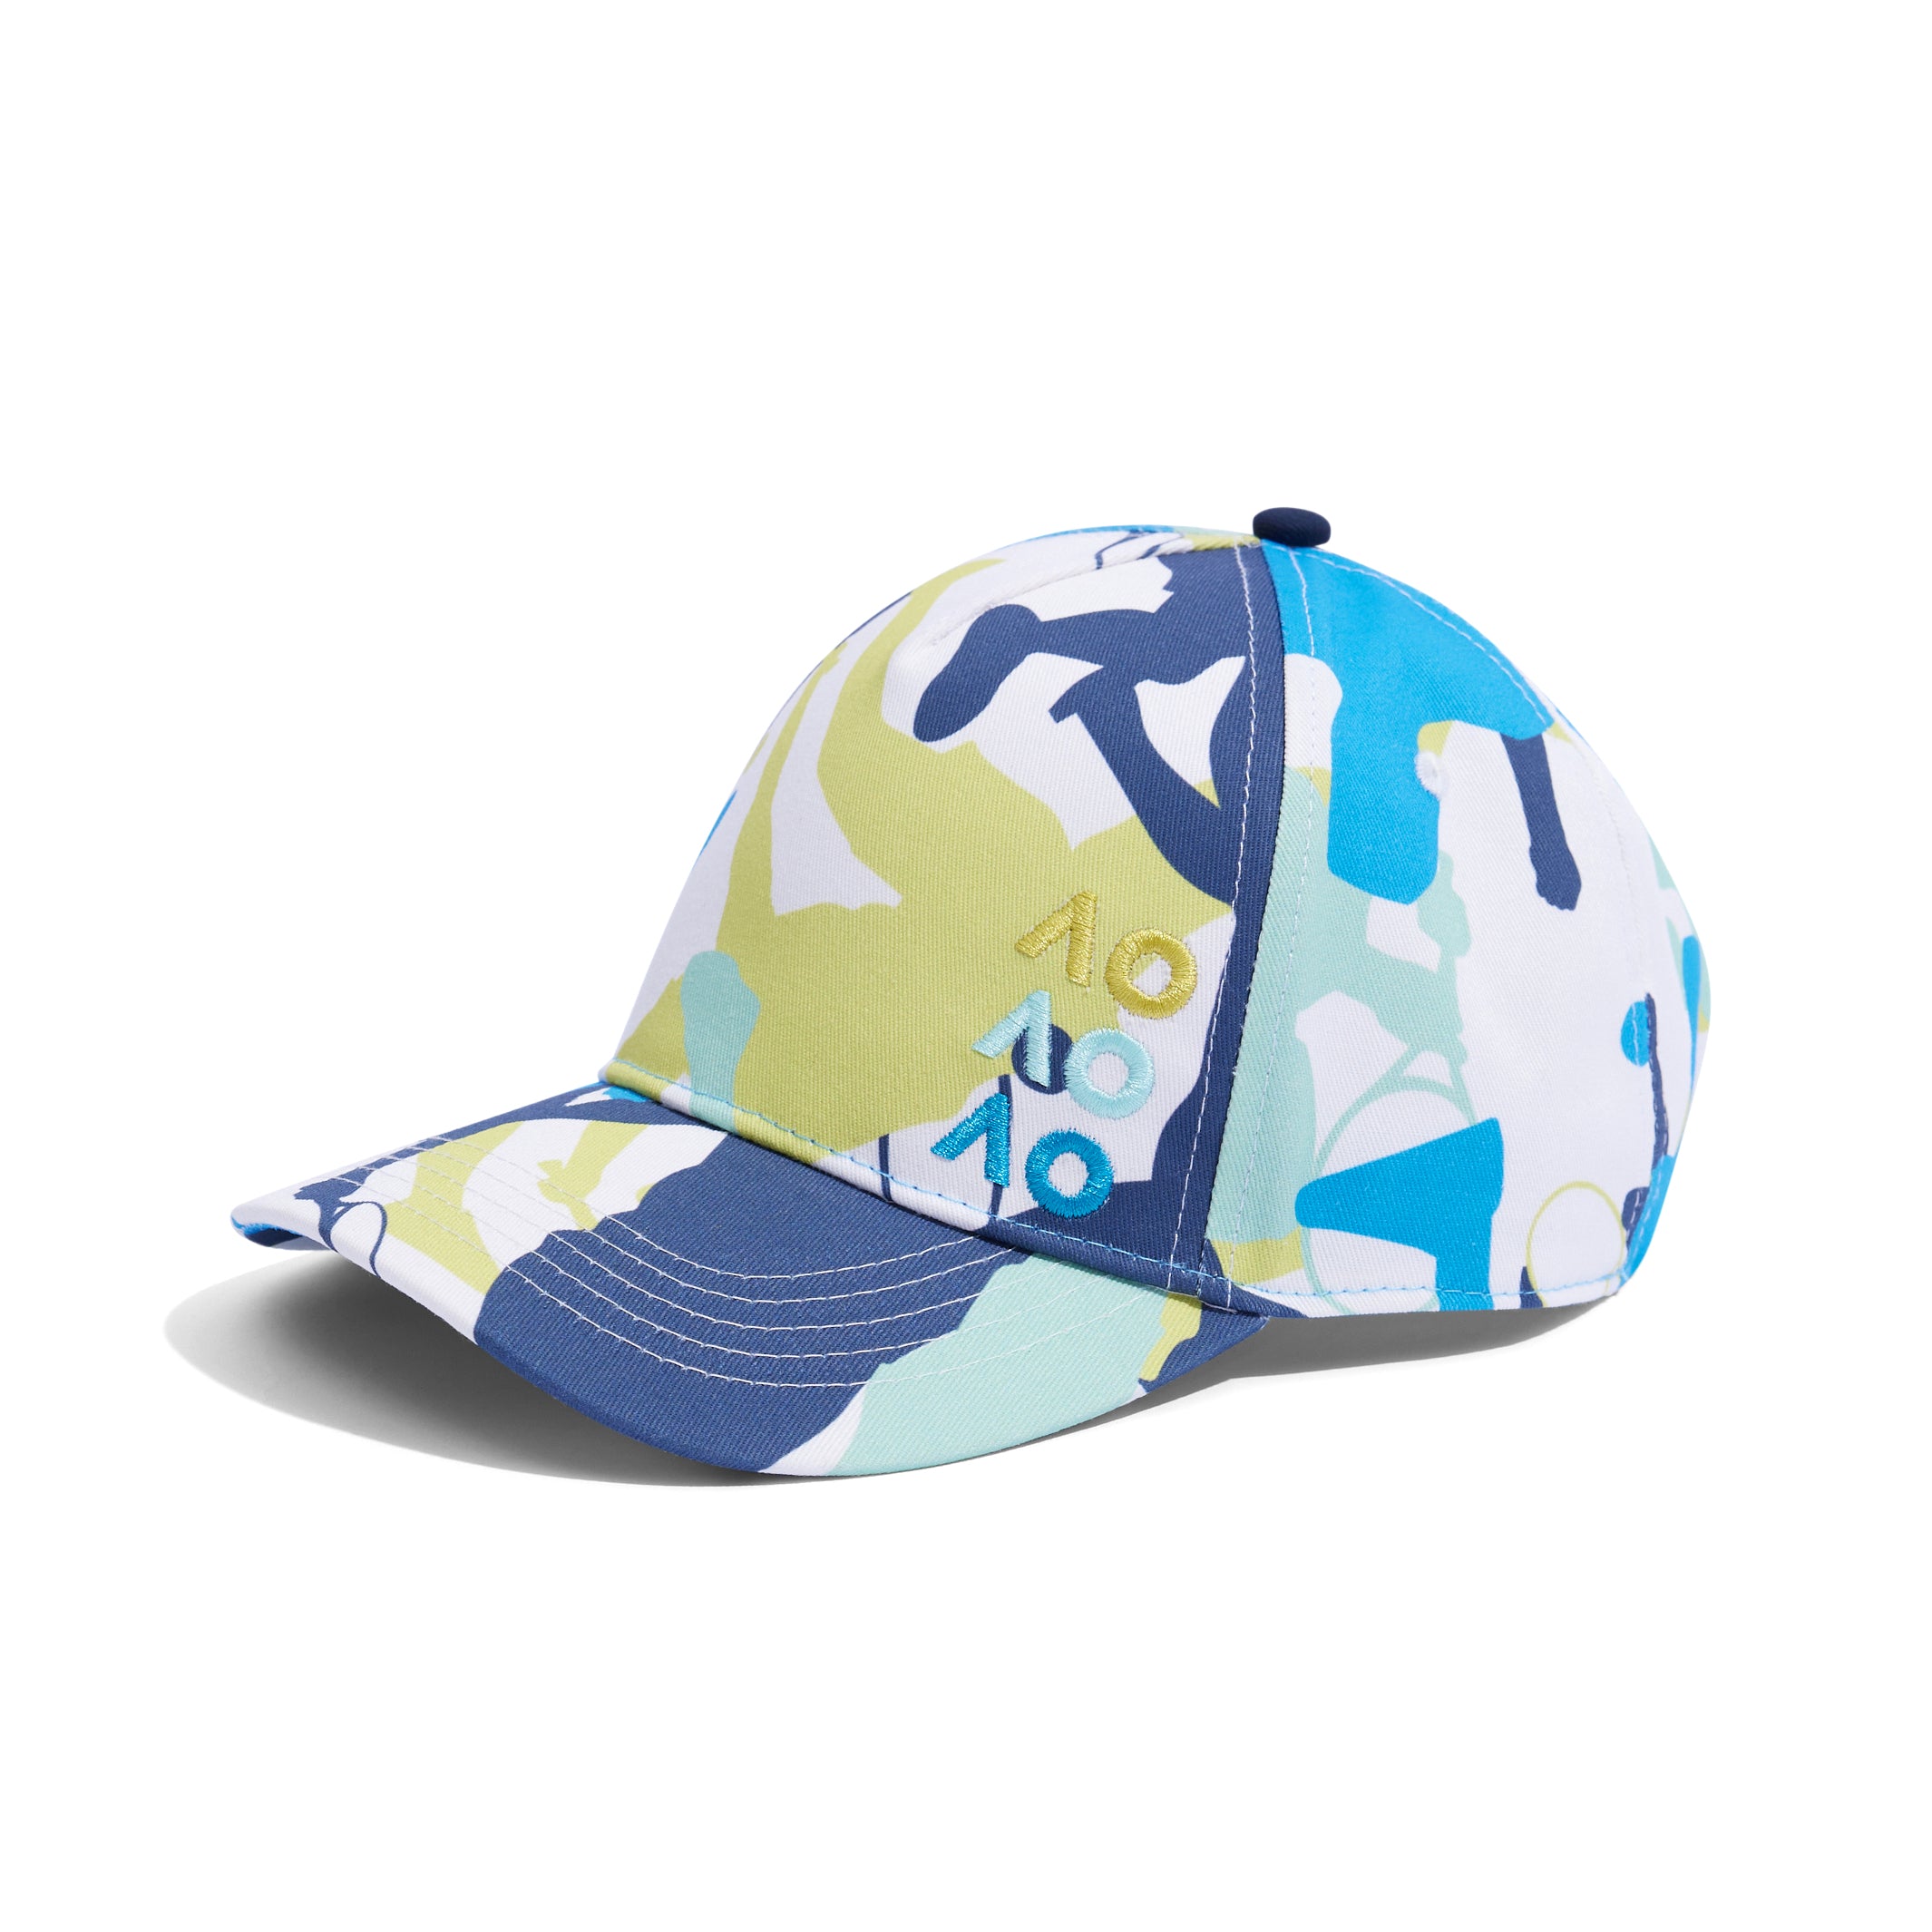 Men's Blue Cap Player  Camouflage Side View